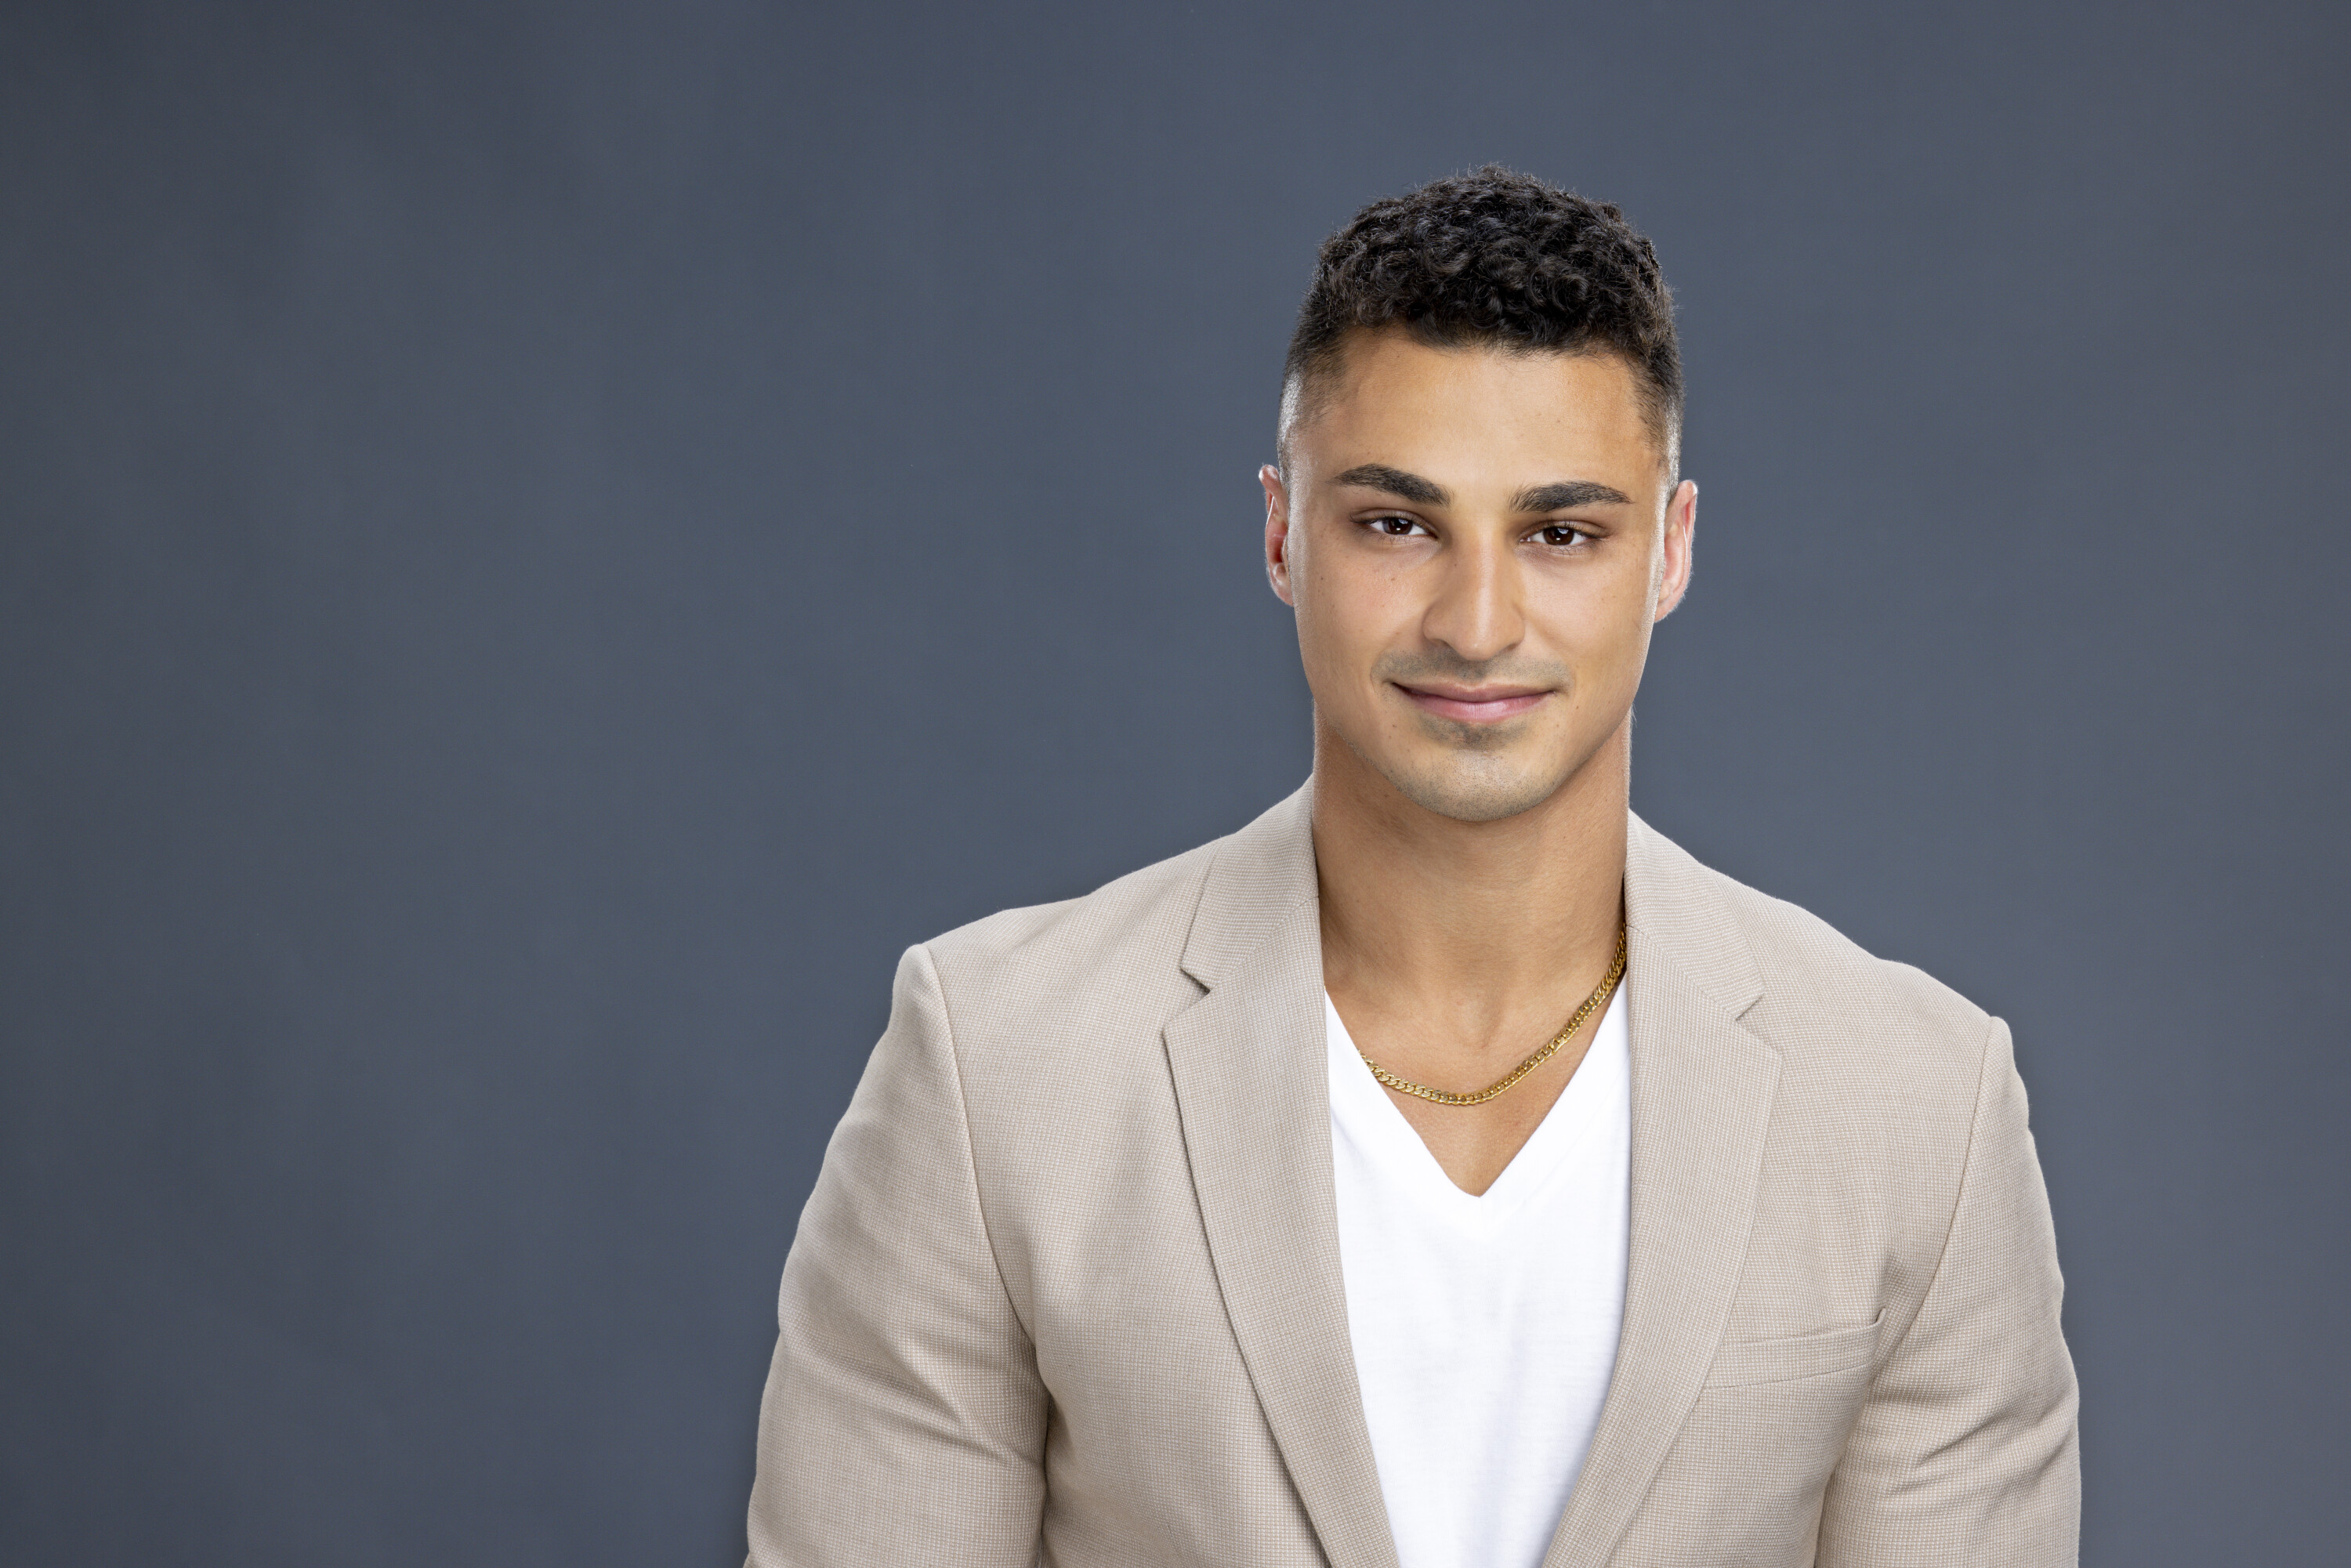 Joseph Abdin, who replaced Marvin in 'Big Brother' Season 24, wears a light tan suit over a white v-neck shirt and gold chain.